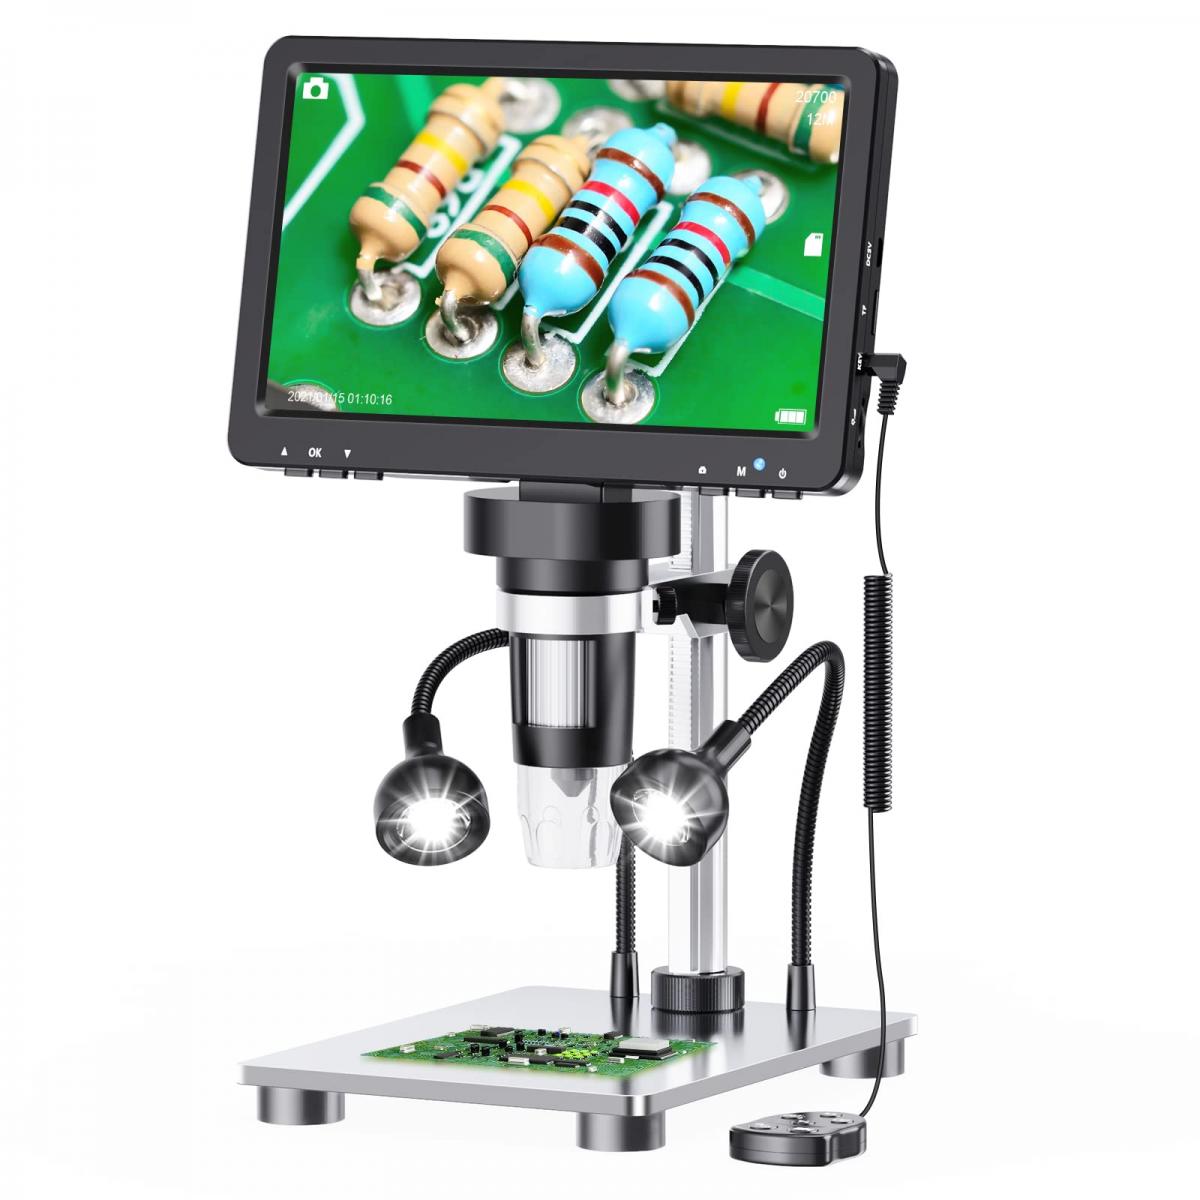 Hayve 7'' HDMI Digital Microscope,1200X Coin Microscope with IPS Screen,  16MP Soldering Microscope with Lights, 8.5'' Long Stand, View Entire Coin,  Compatible with PC/TV, 32GB Card 7''HDMI IPS Digital Microscope(DM9-H)